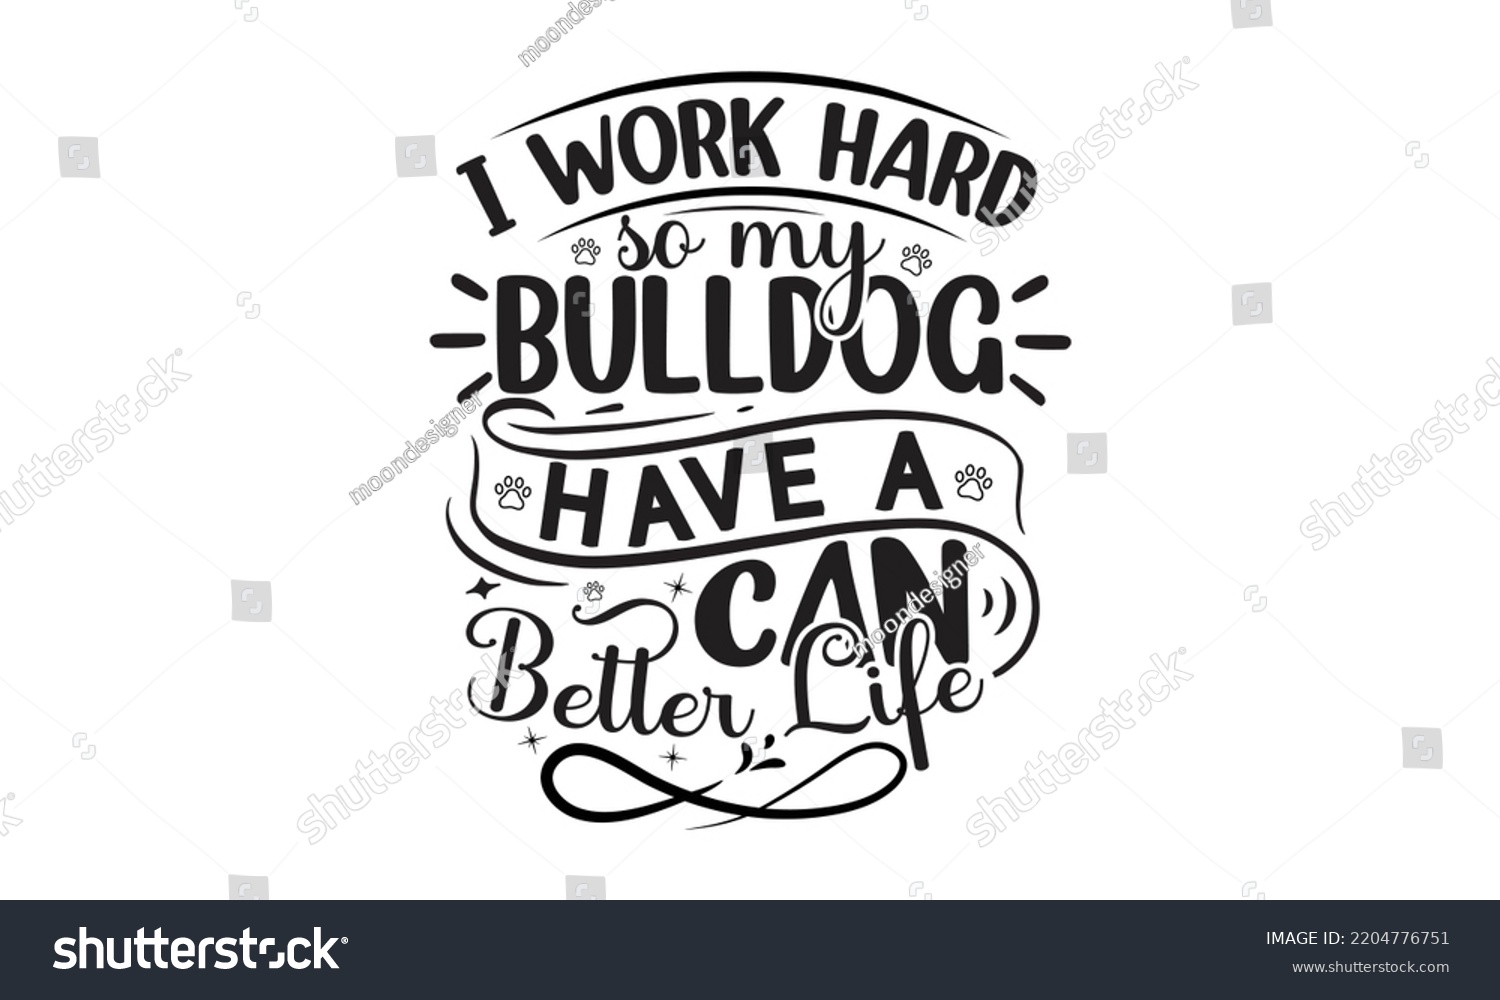 SVG of I work hard so my bulldog can have a better life - Bullodog T-shirt and SVG Design,  Dog lover t shirt design gift for women, typography design, can you download this Design, svg Files for Cutting svg